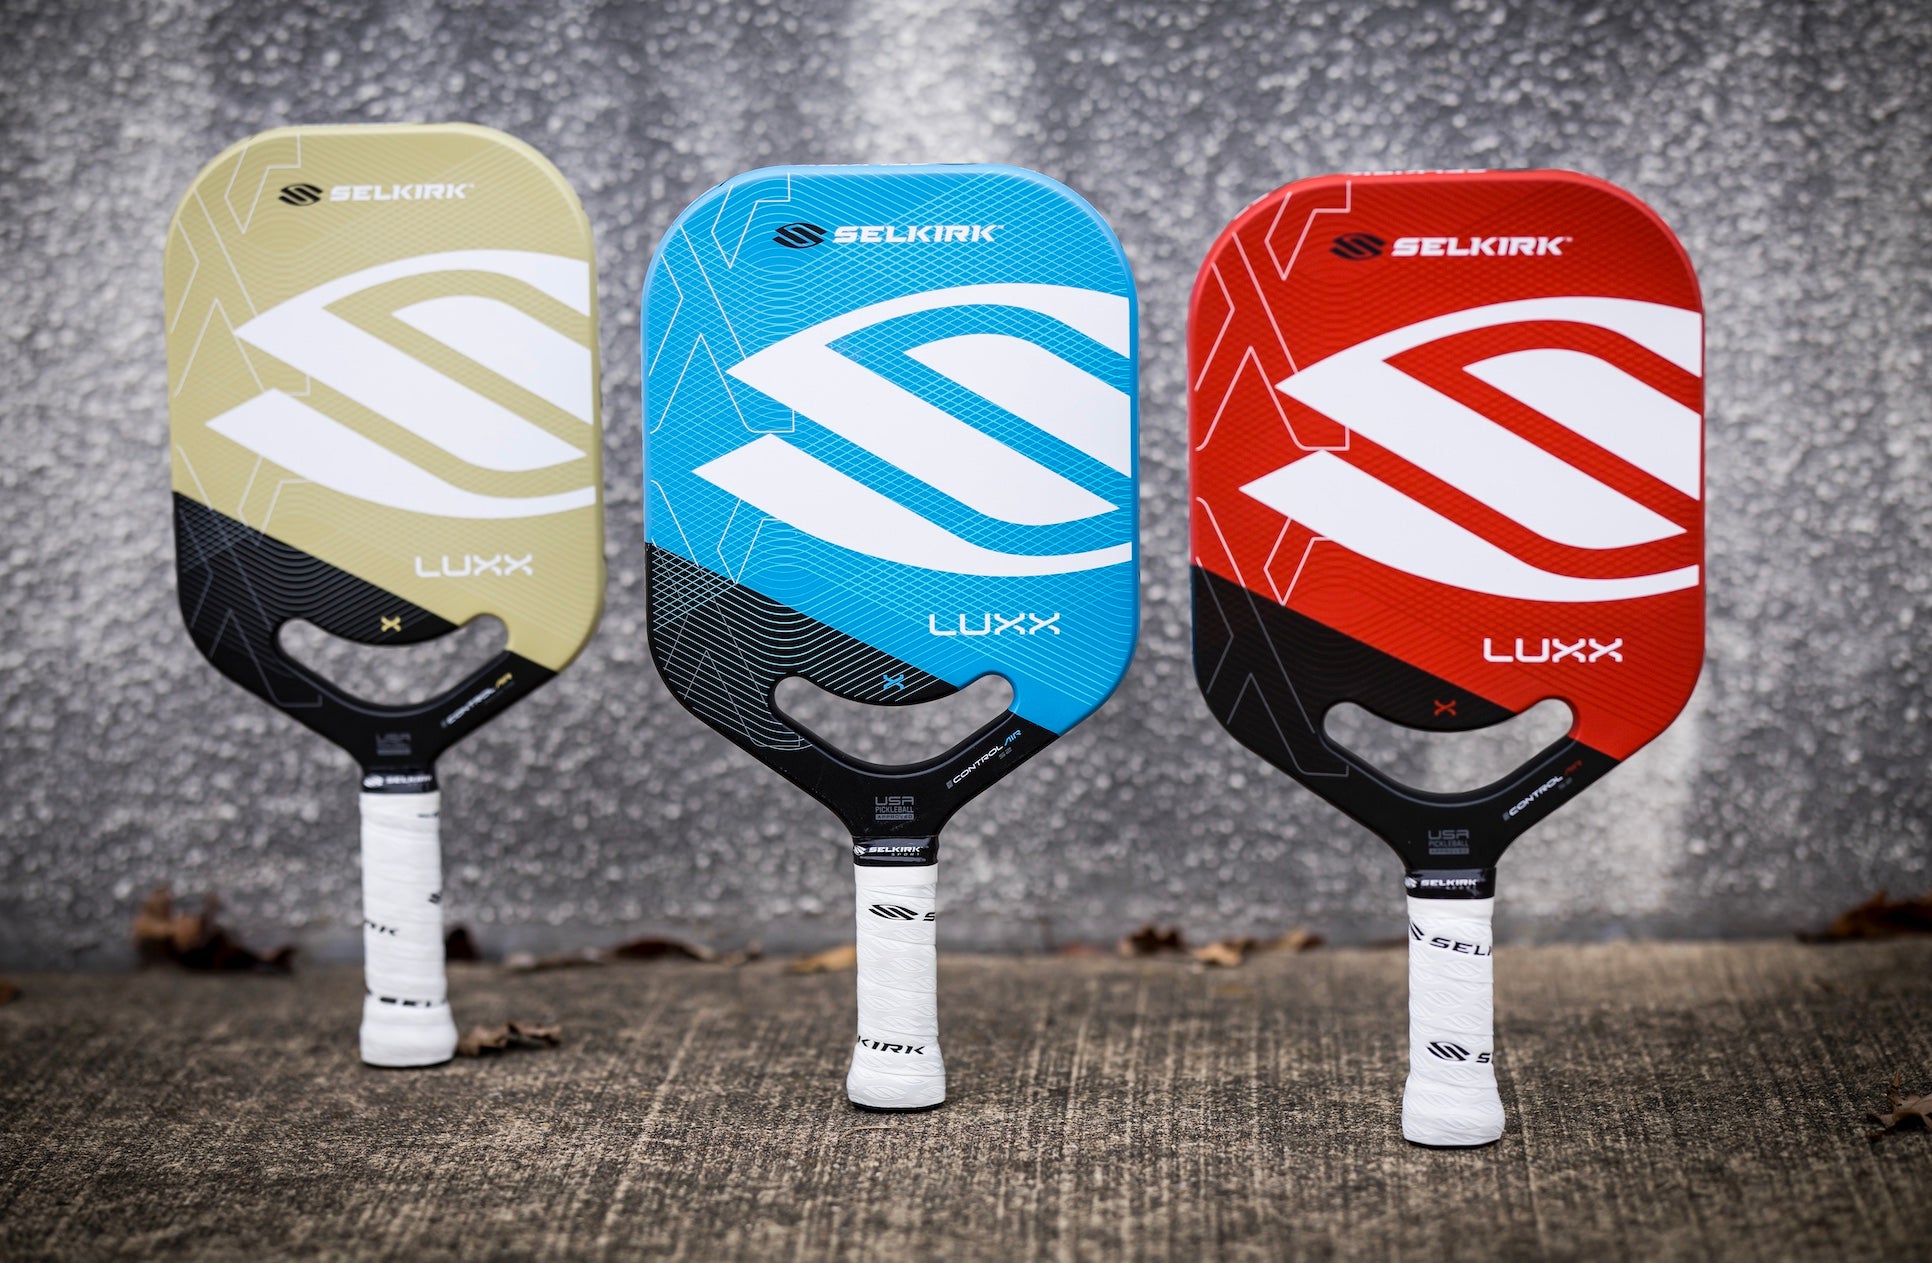 Selkirk Luxx Control Air pickleball paddle collection